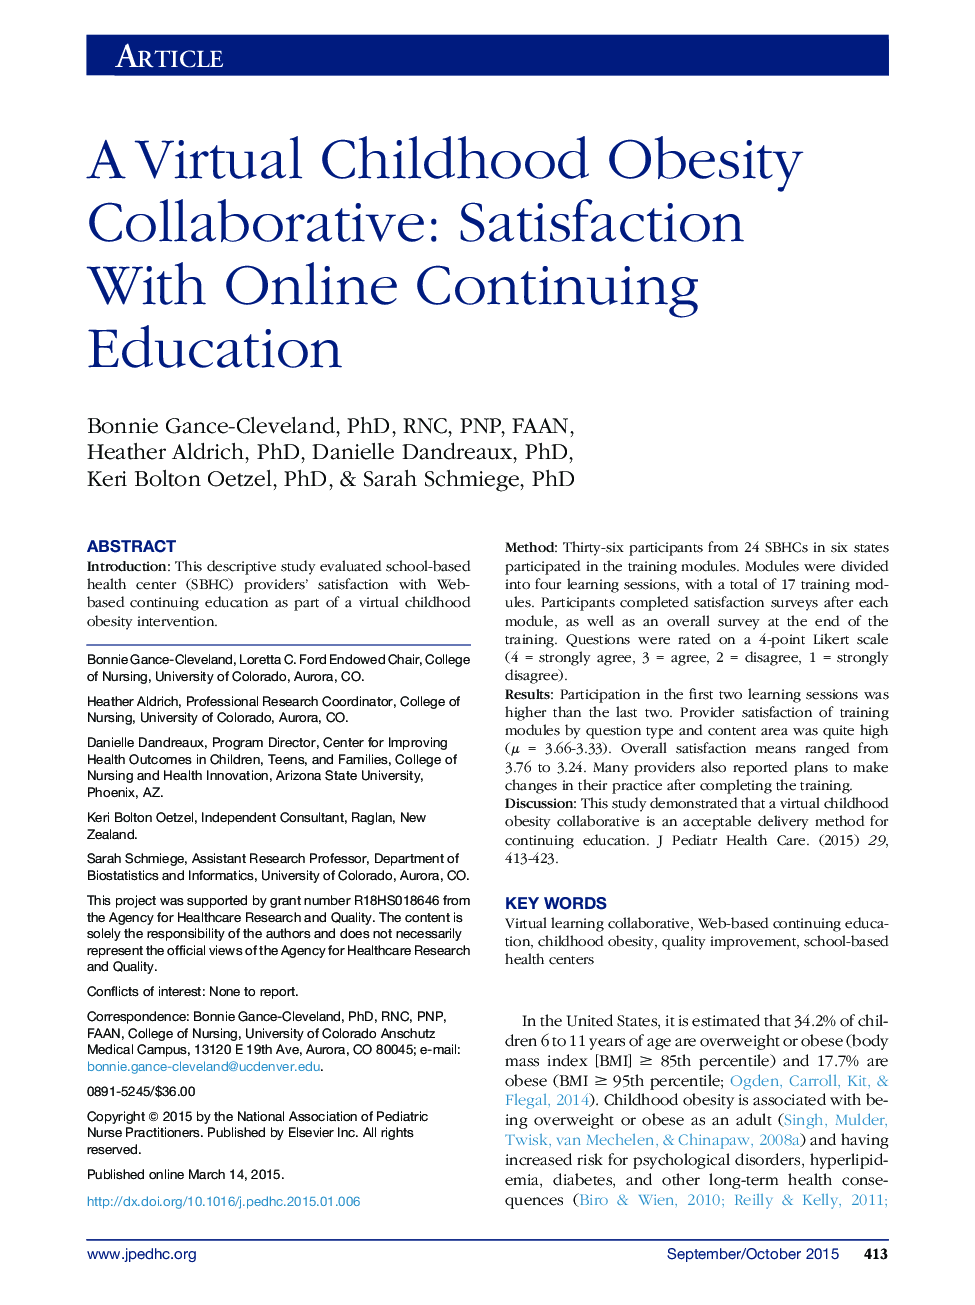 A Virtual Childhood Obesity Collaborative: Satisfaction With Online Continuing Education 